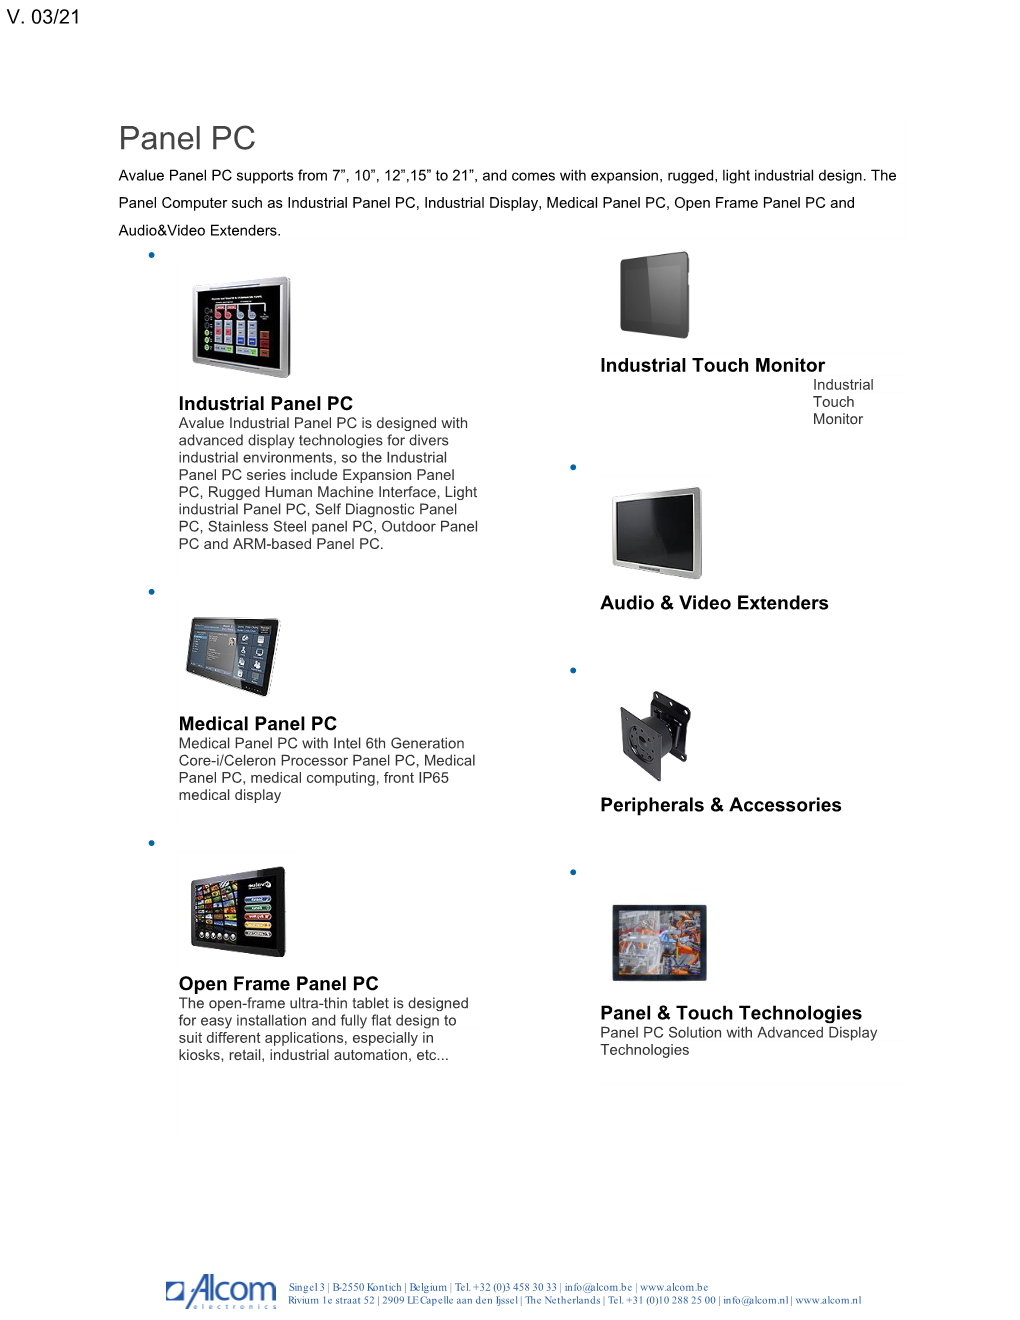 Panel PC Avalue Panel PC Supports from 7”, 10”, 12”,15” to 21”, and Comes with Expansion, Rugged, Light Industrial Design